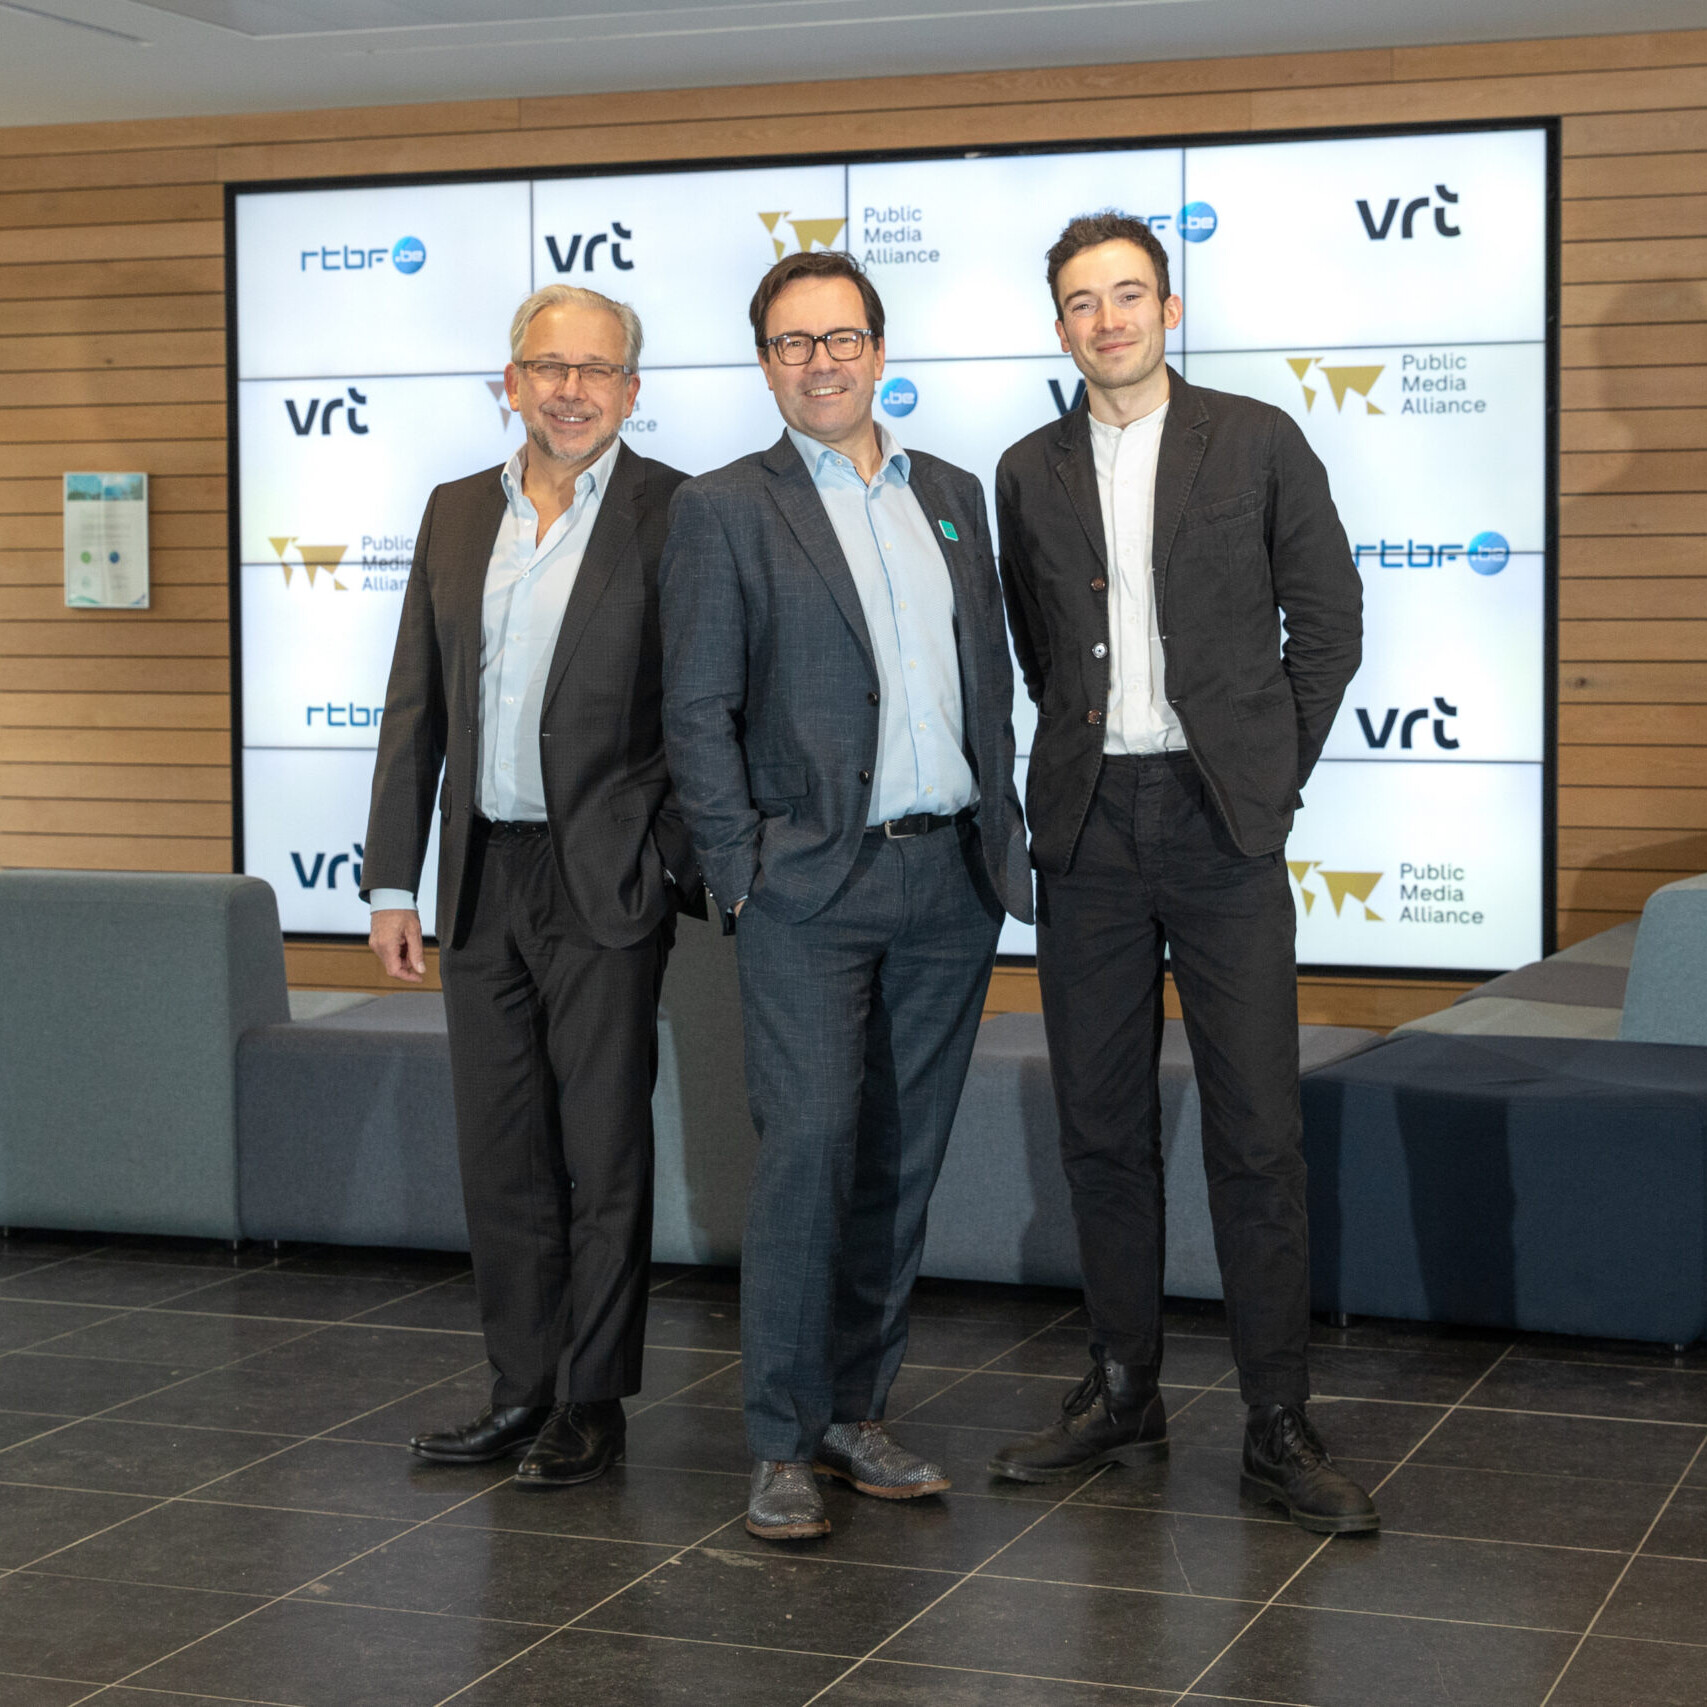 Three men stand in front of a screen with the VRT, PMA, and RTBF logos on it.